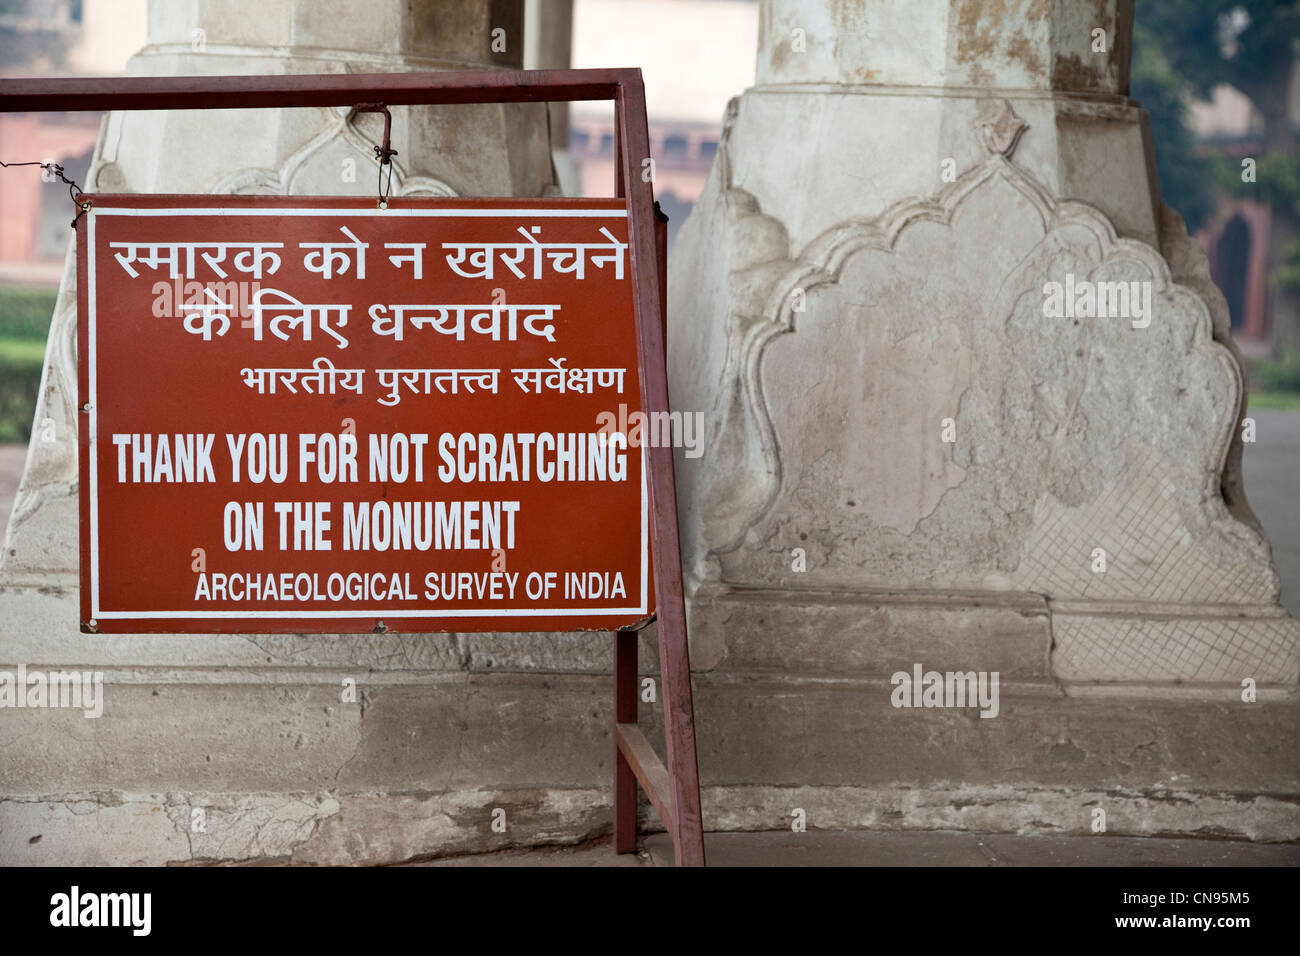 Agra, India. Agra Fort. Sign Asking Visitors not to Deface the Buildings. Anti-Graffiti Request. Stock Photo